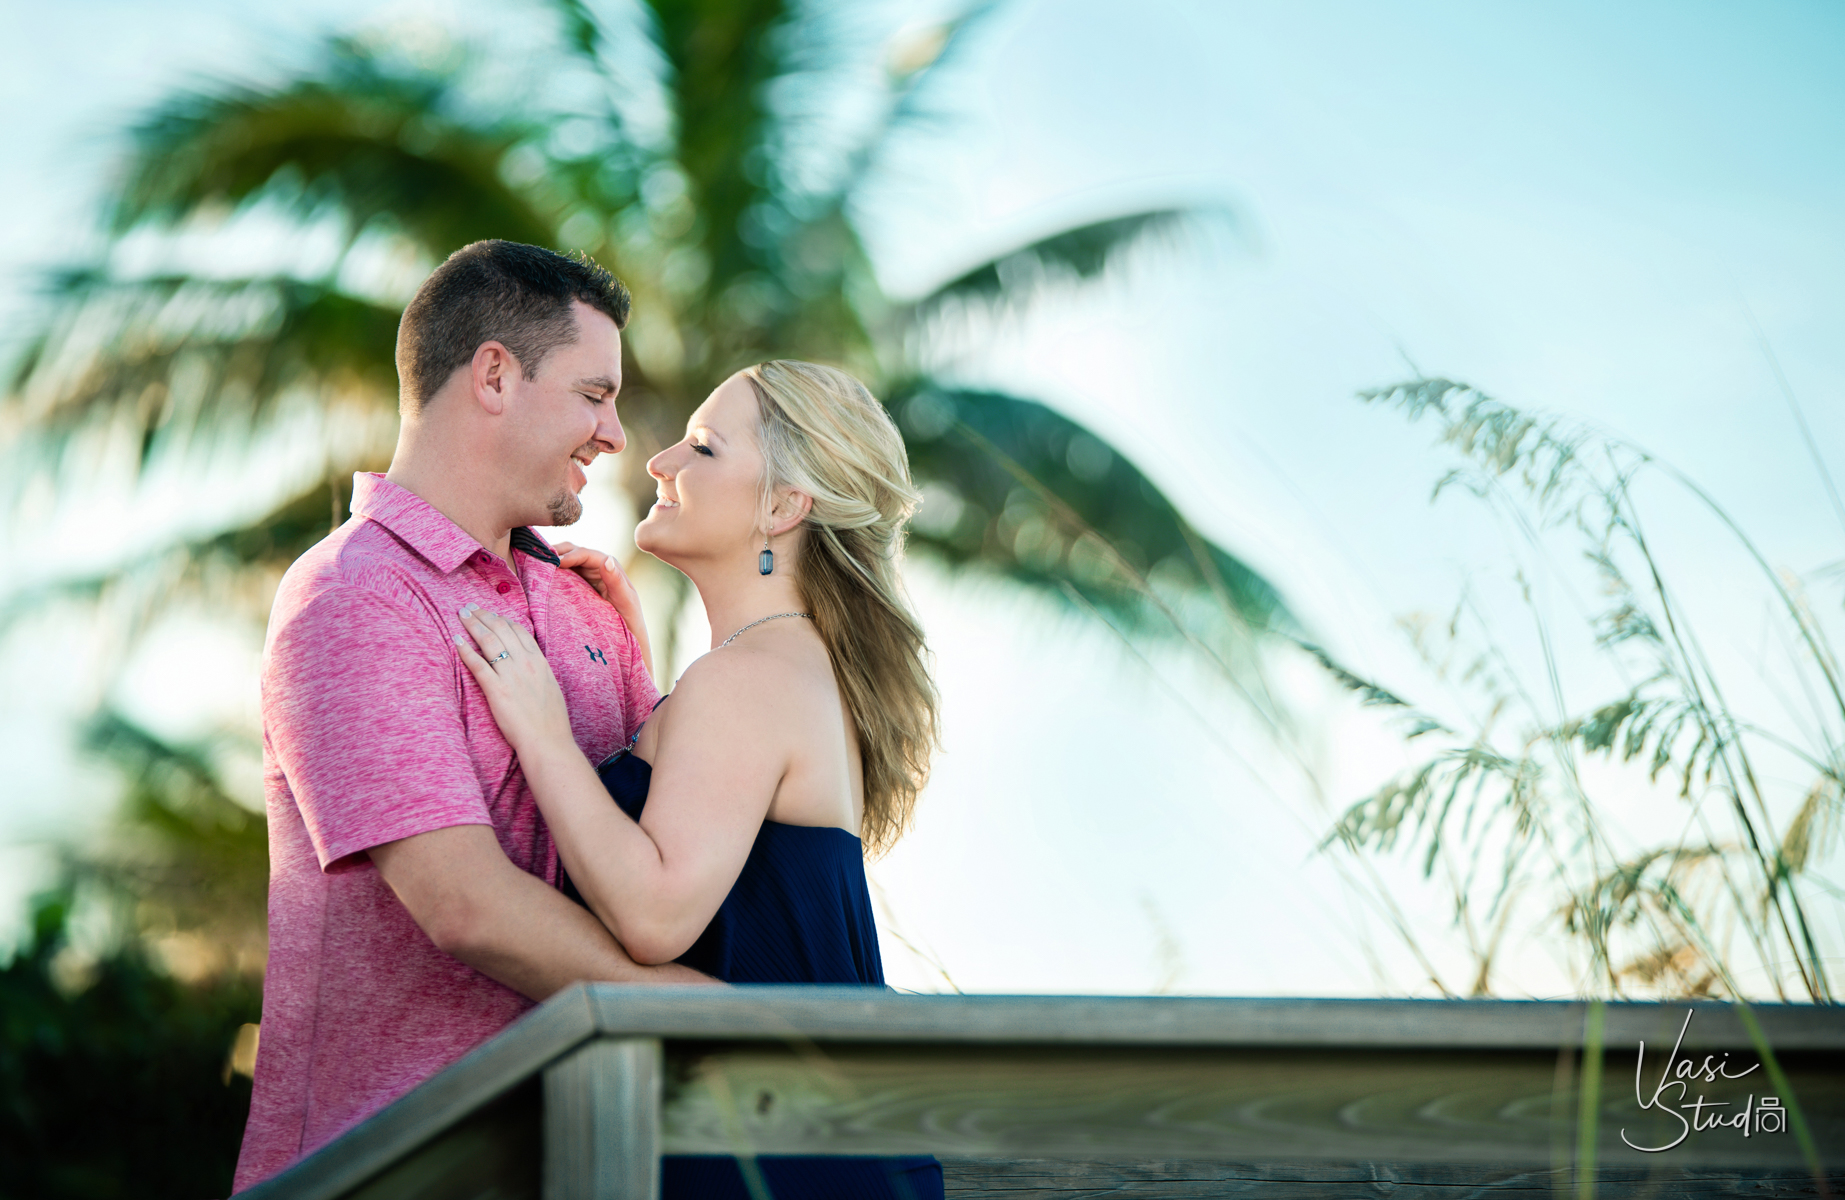 Contact us at 561-307-9875 to schedule your engagement photos.